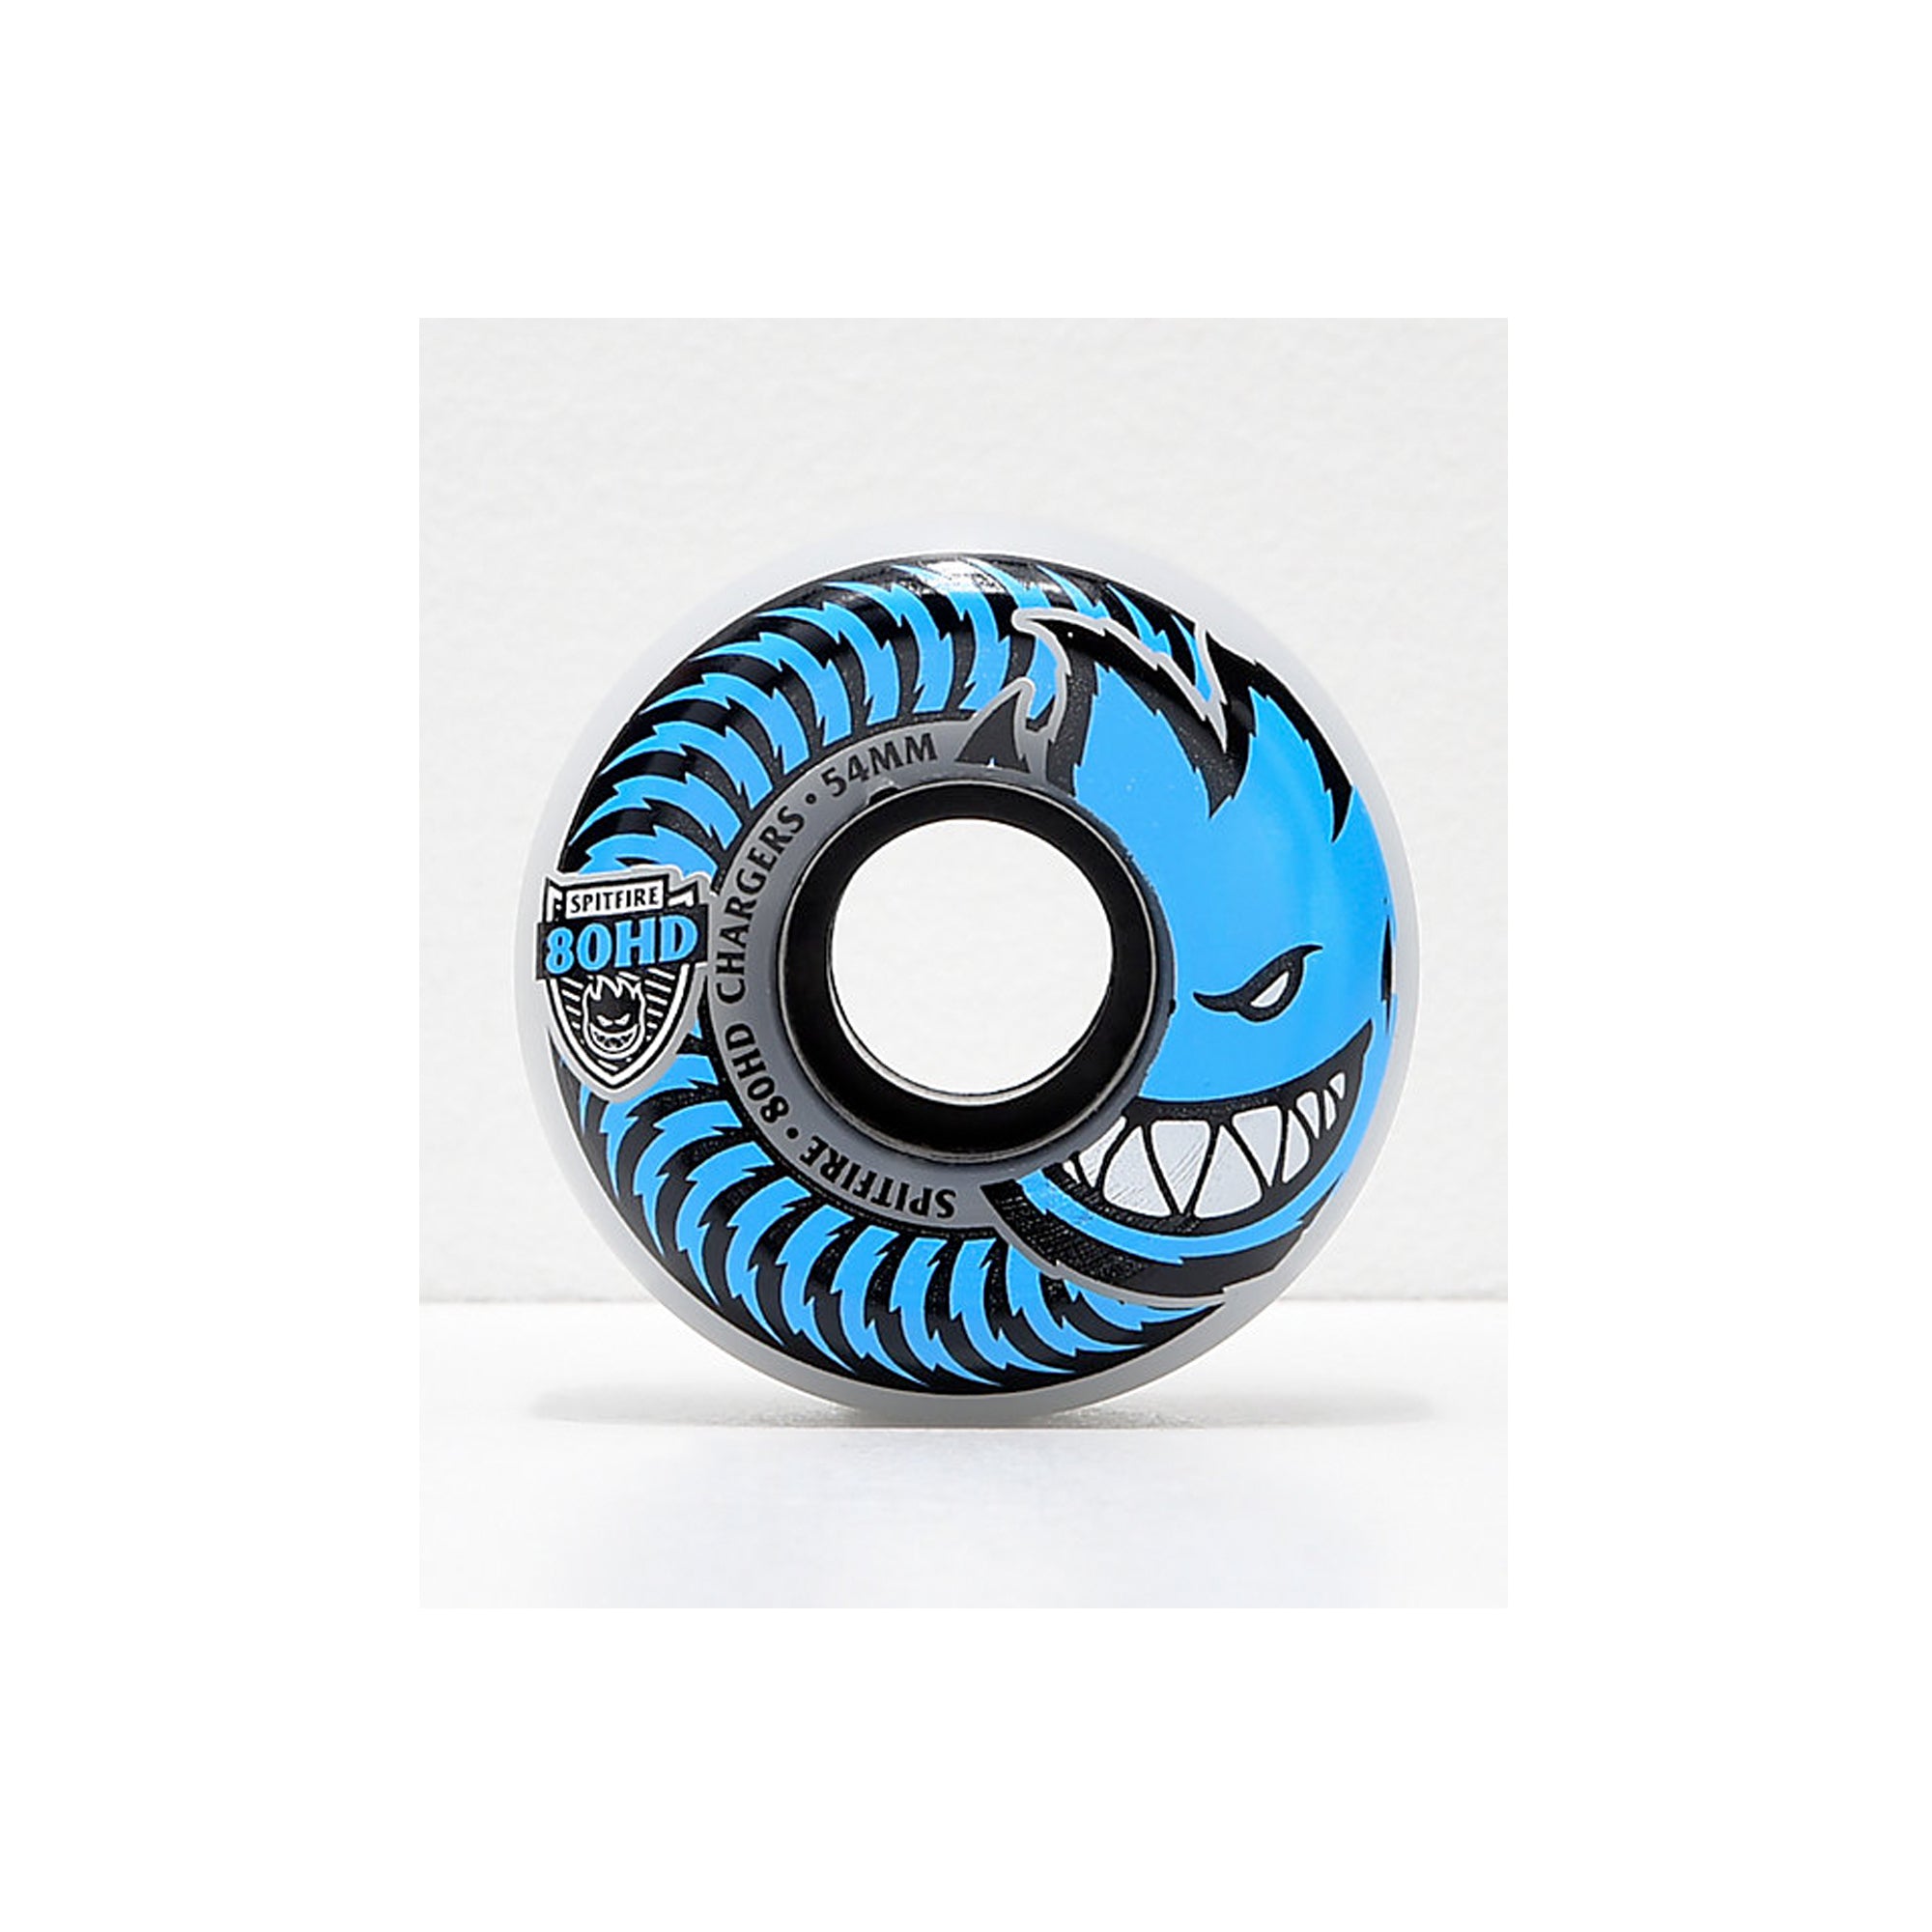 Spitfire Chargers Conical 54mm 80HD Skateboard Wheels